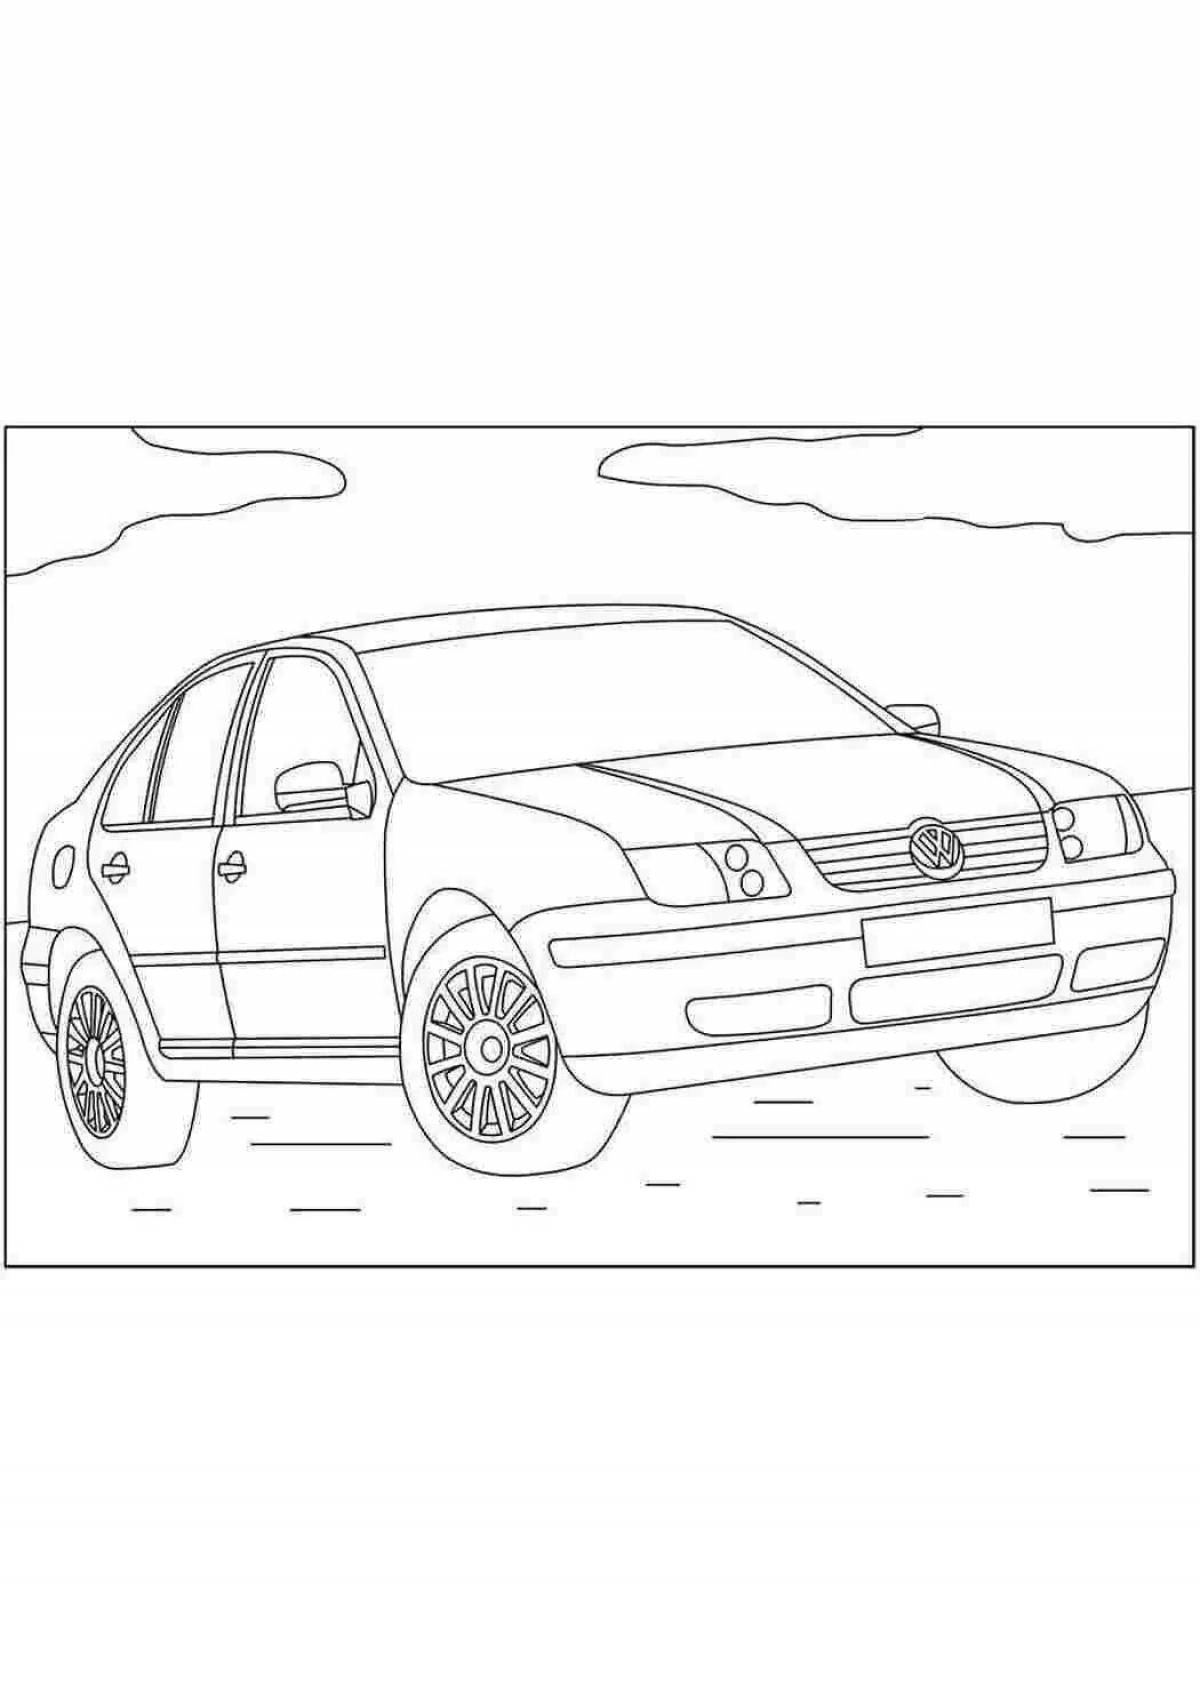 Coloring page attractive volkswagen cars